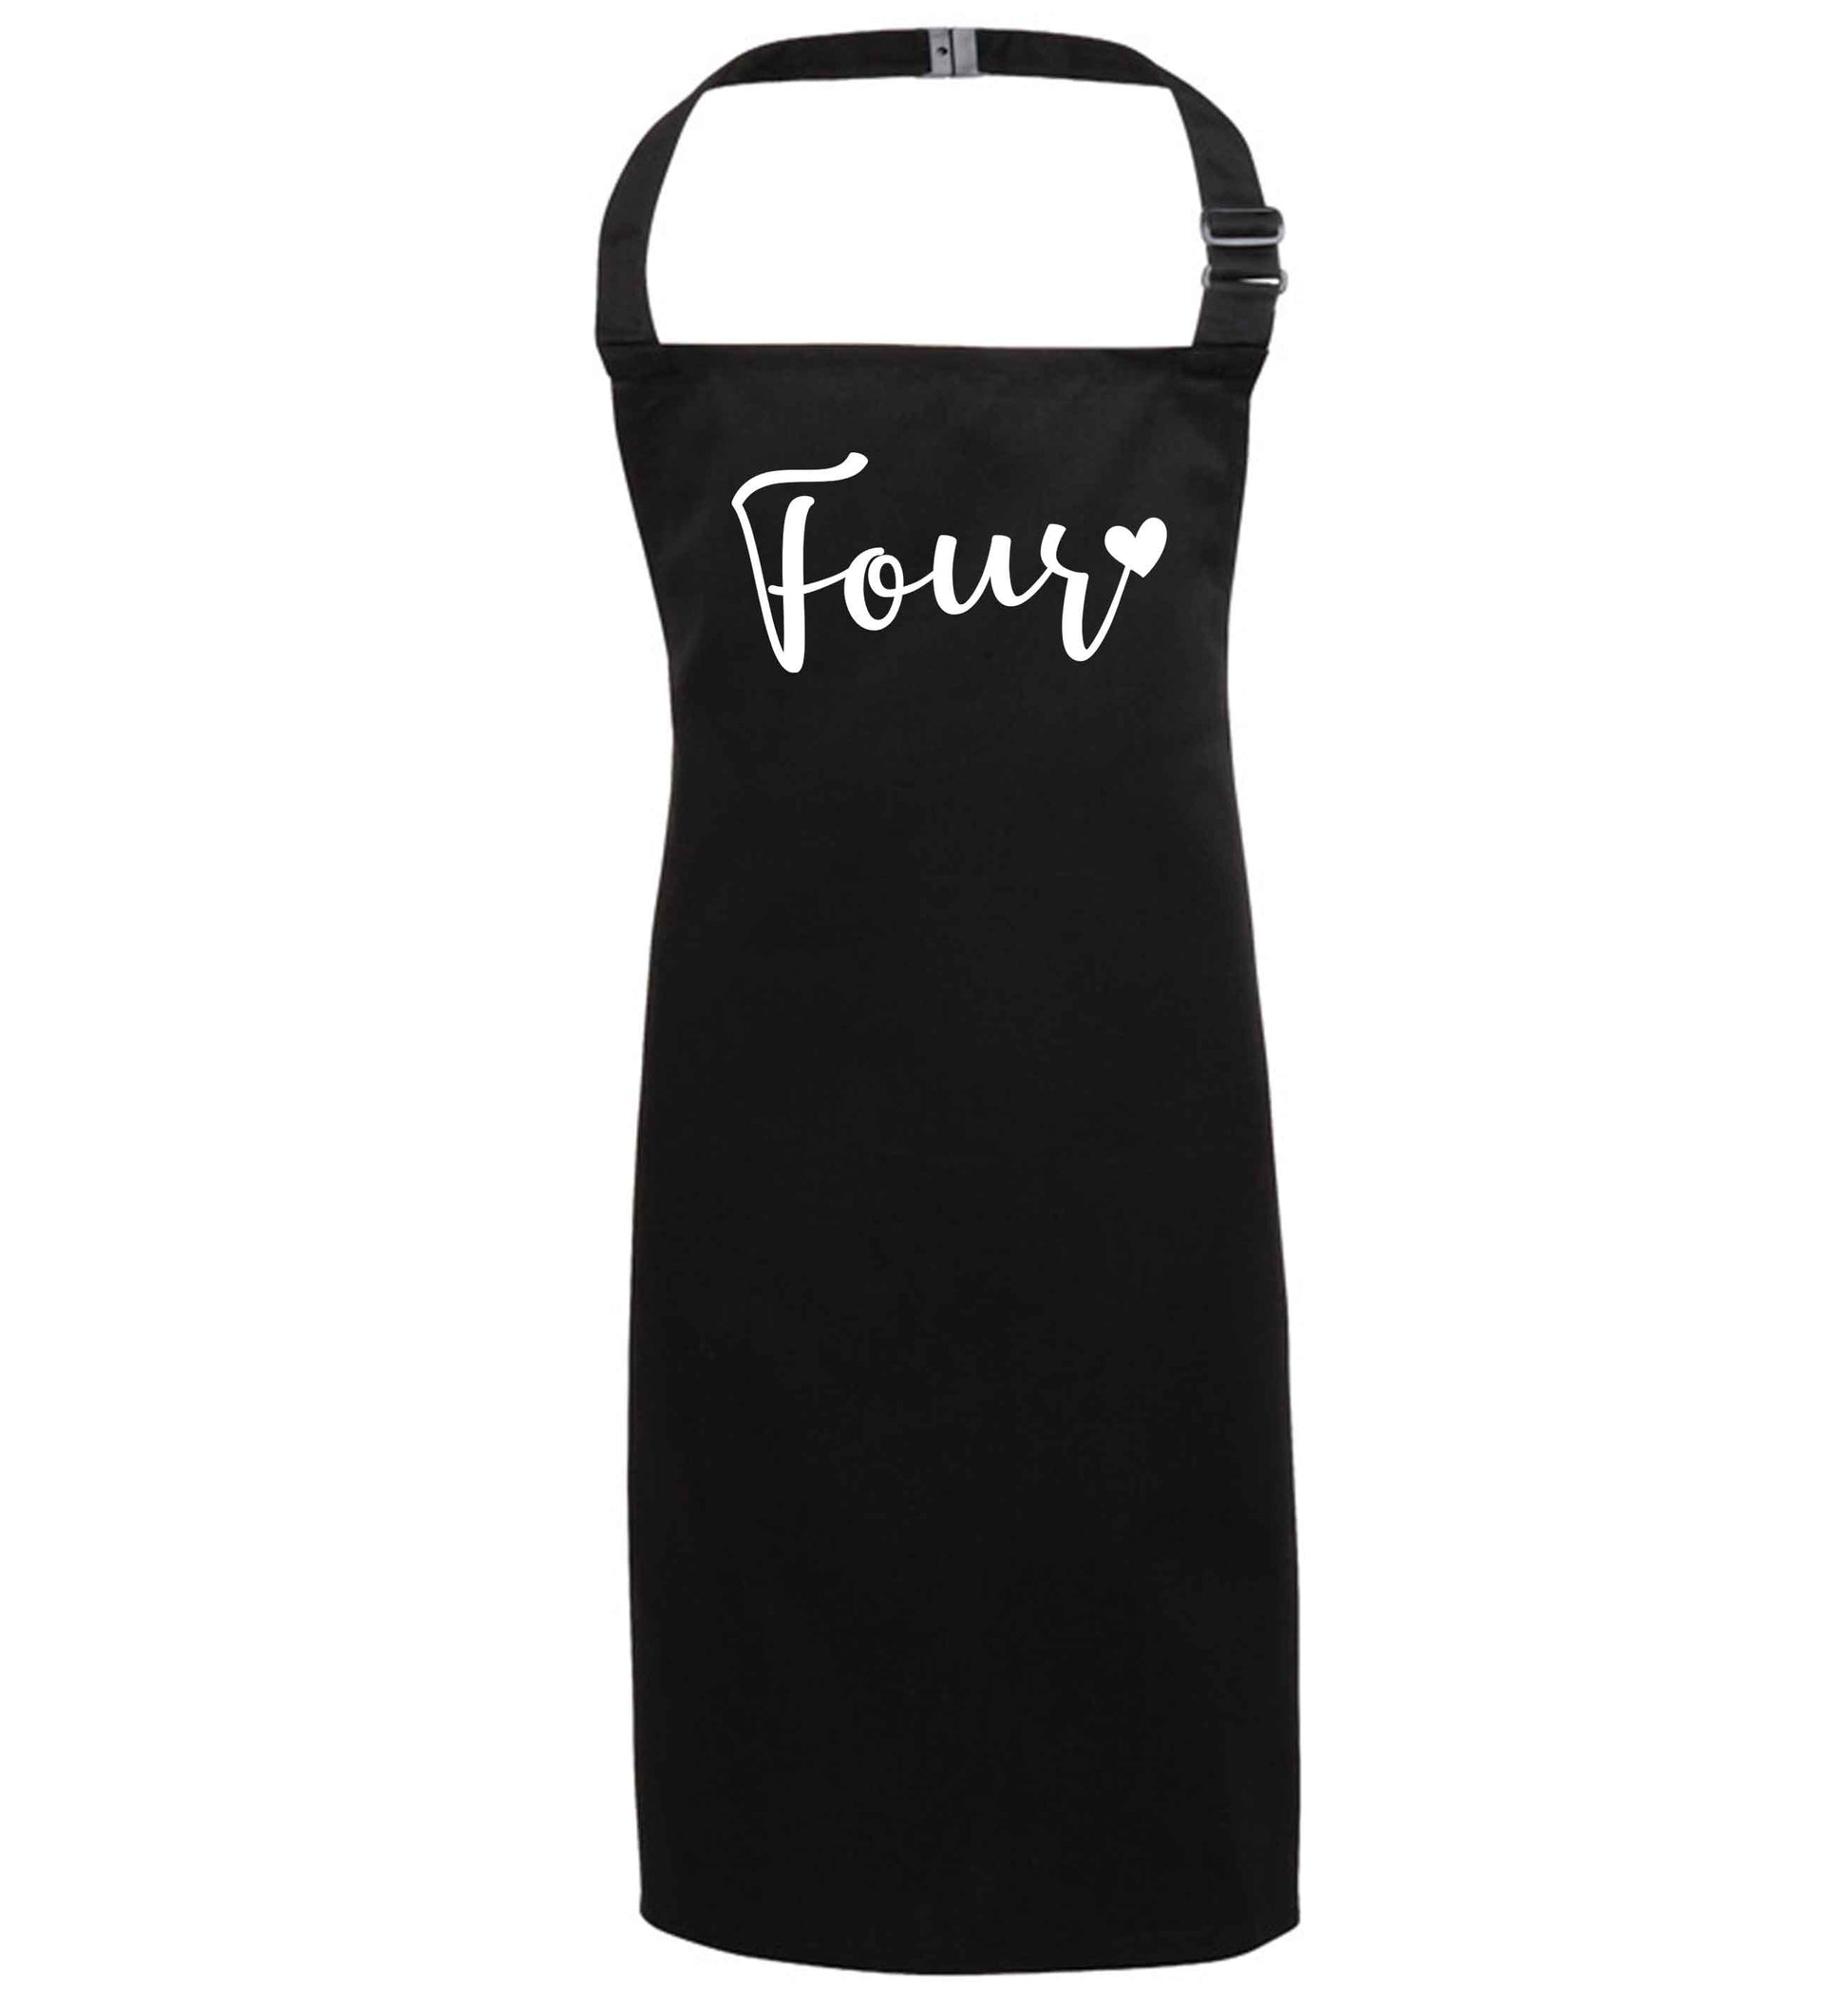 Four and heart black apron 7-10 years